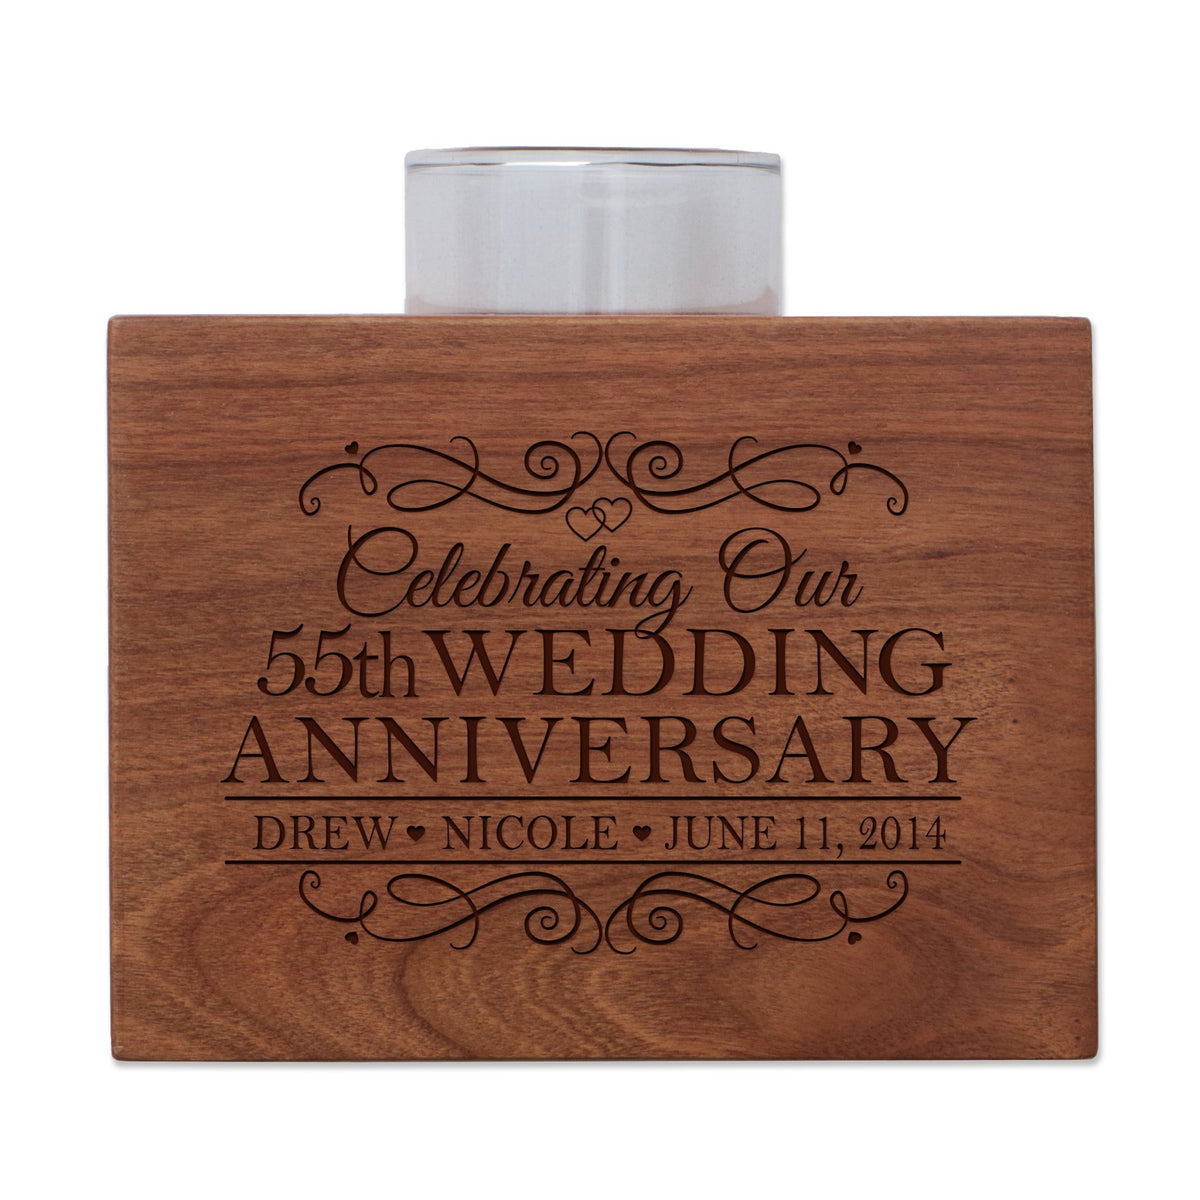 Personalized Cherry Wood Single Votive Candle Holder - 55th Wedding Anniversary - LifeSong Milestones